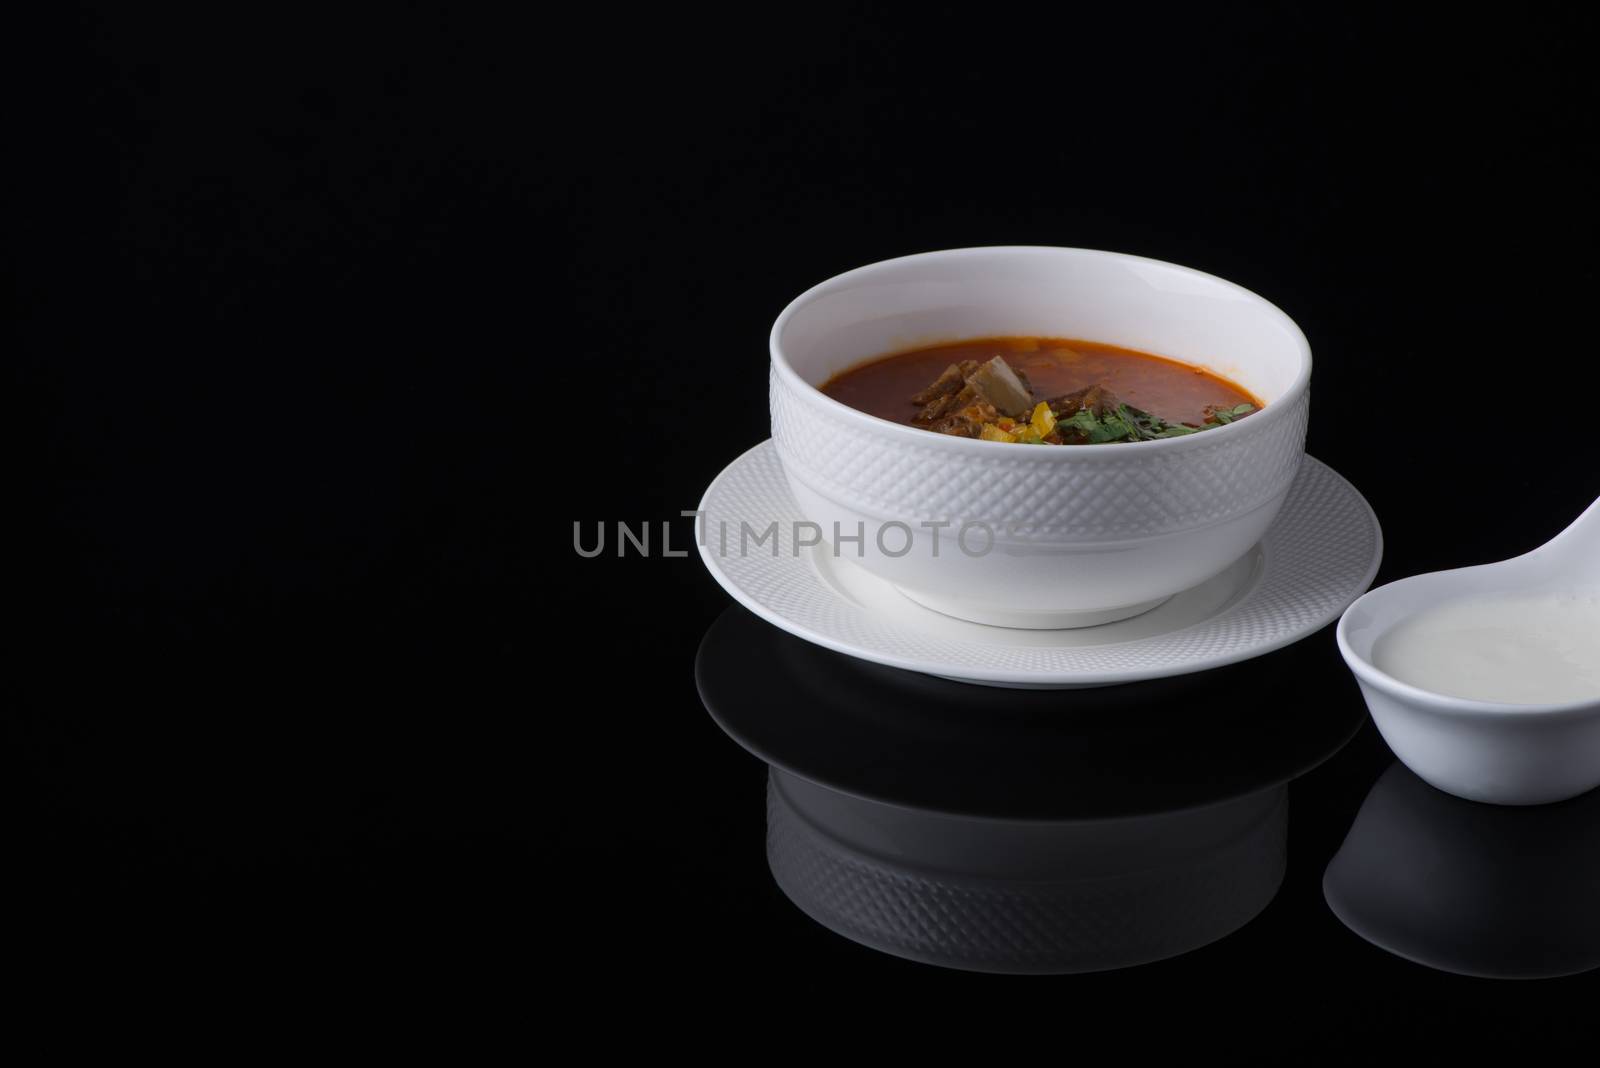 meat soup in a white bowl on a black background, isolated